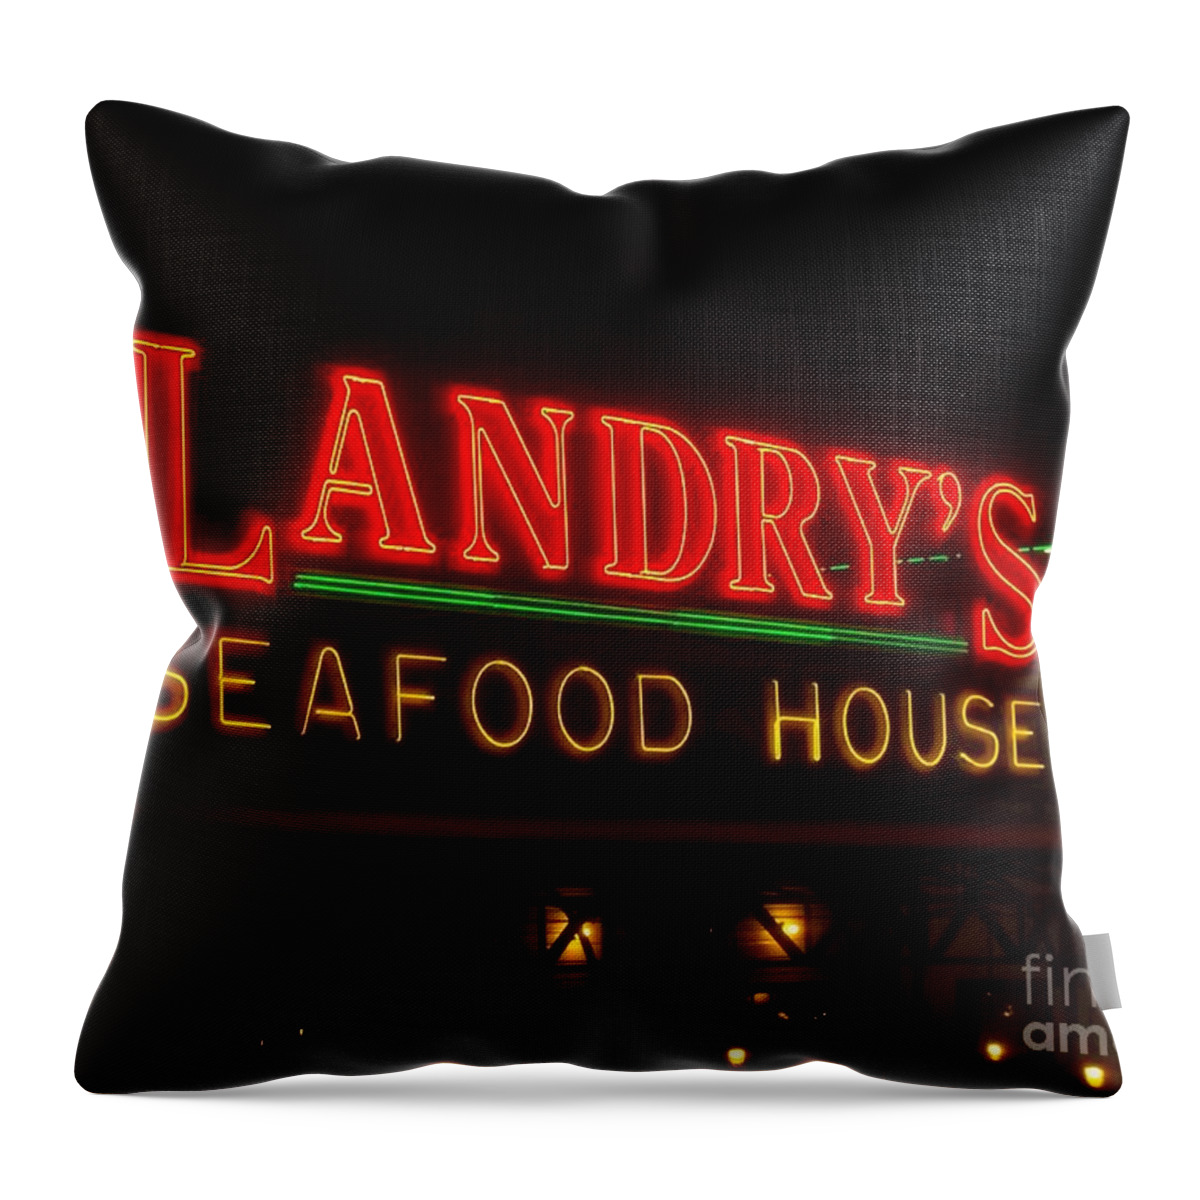  Throw Pillow featuring the photograph Landry's Seafood House by Kelly Awad